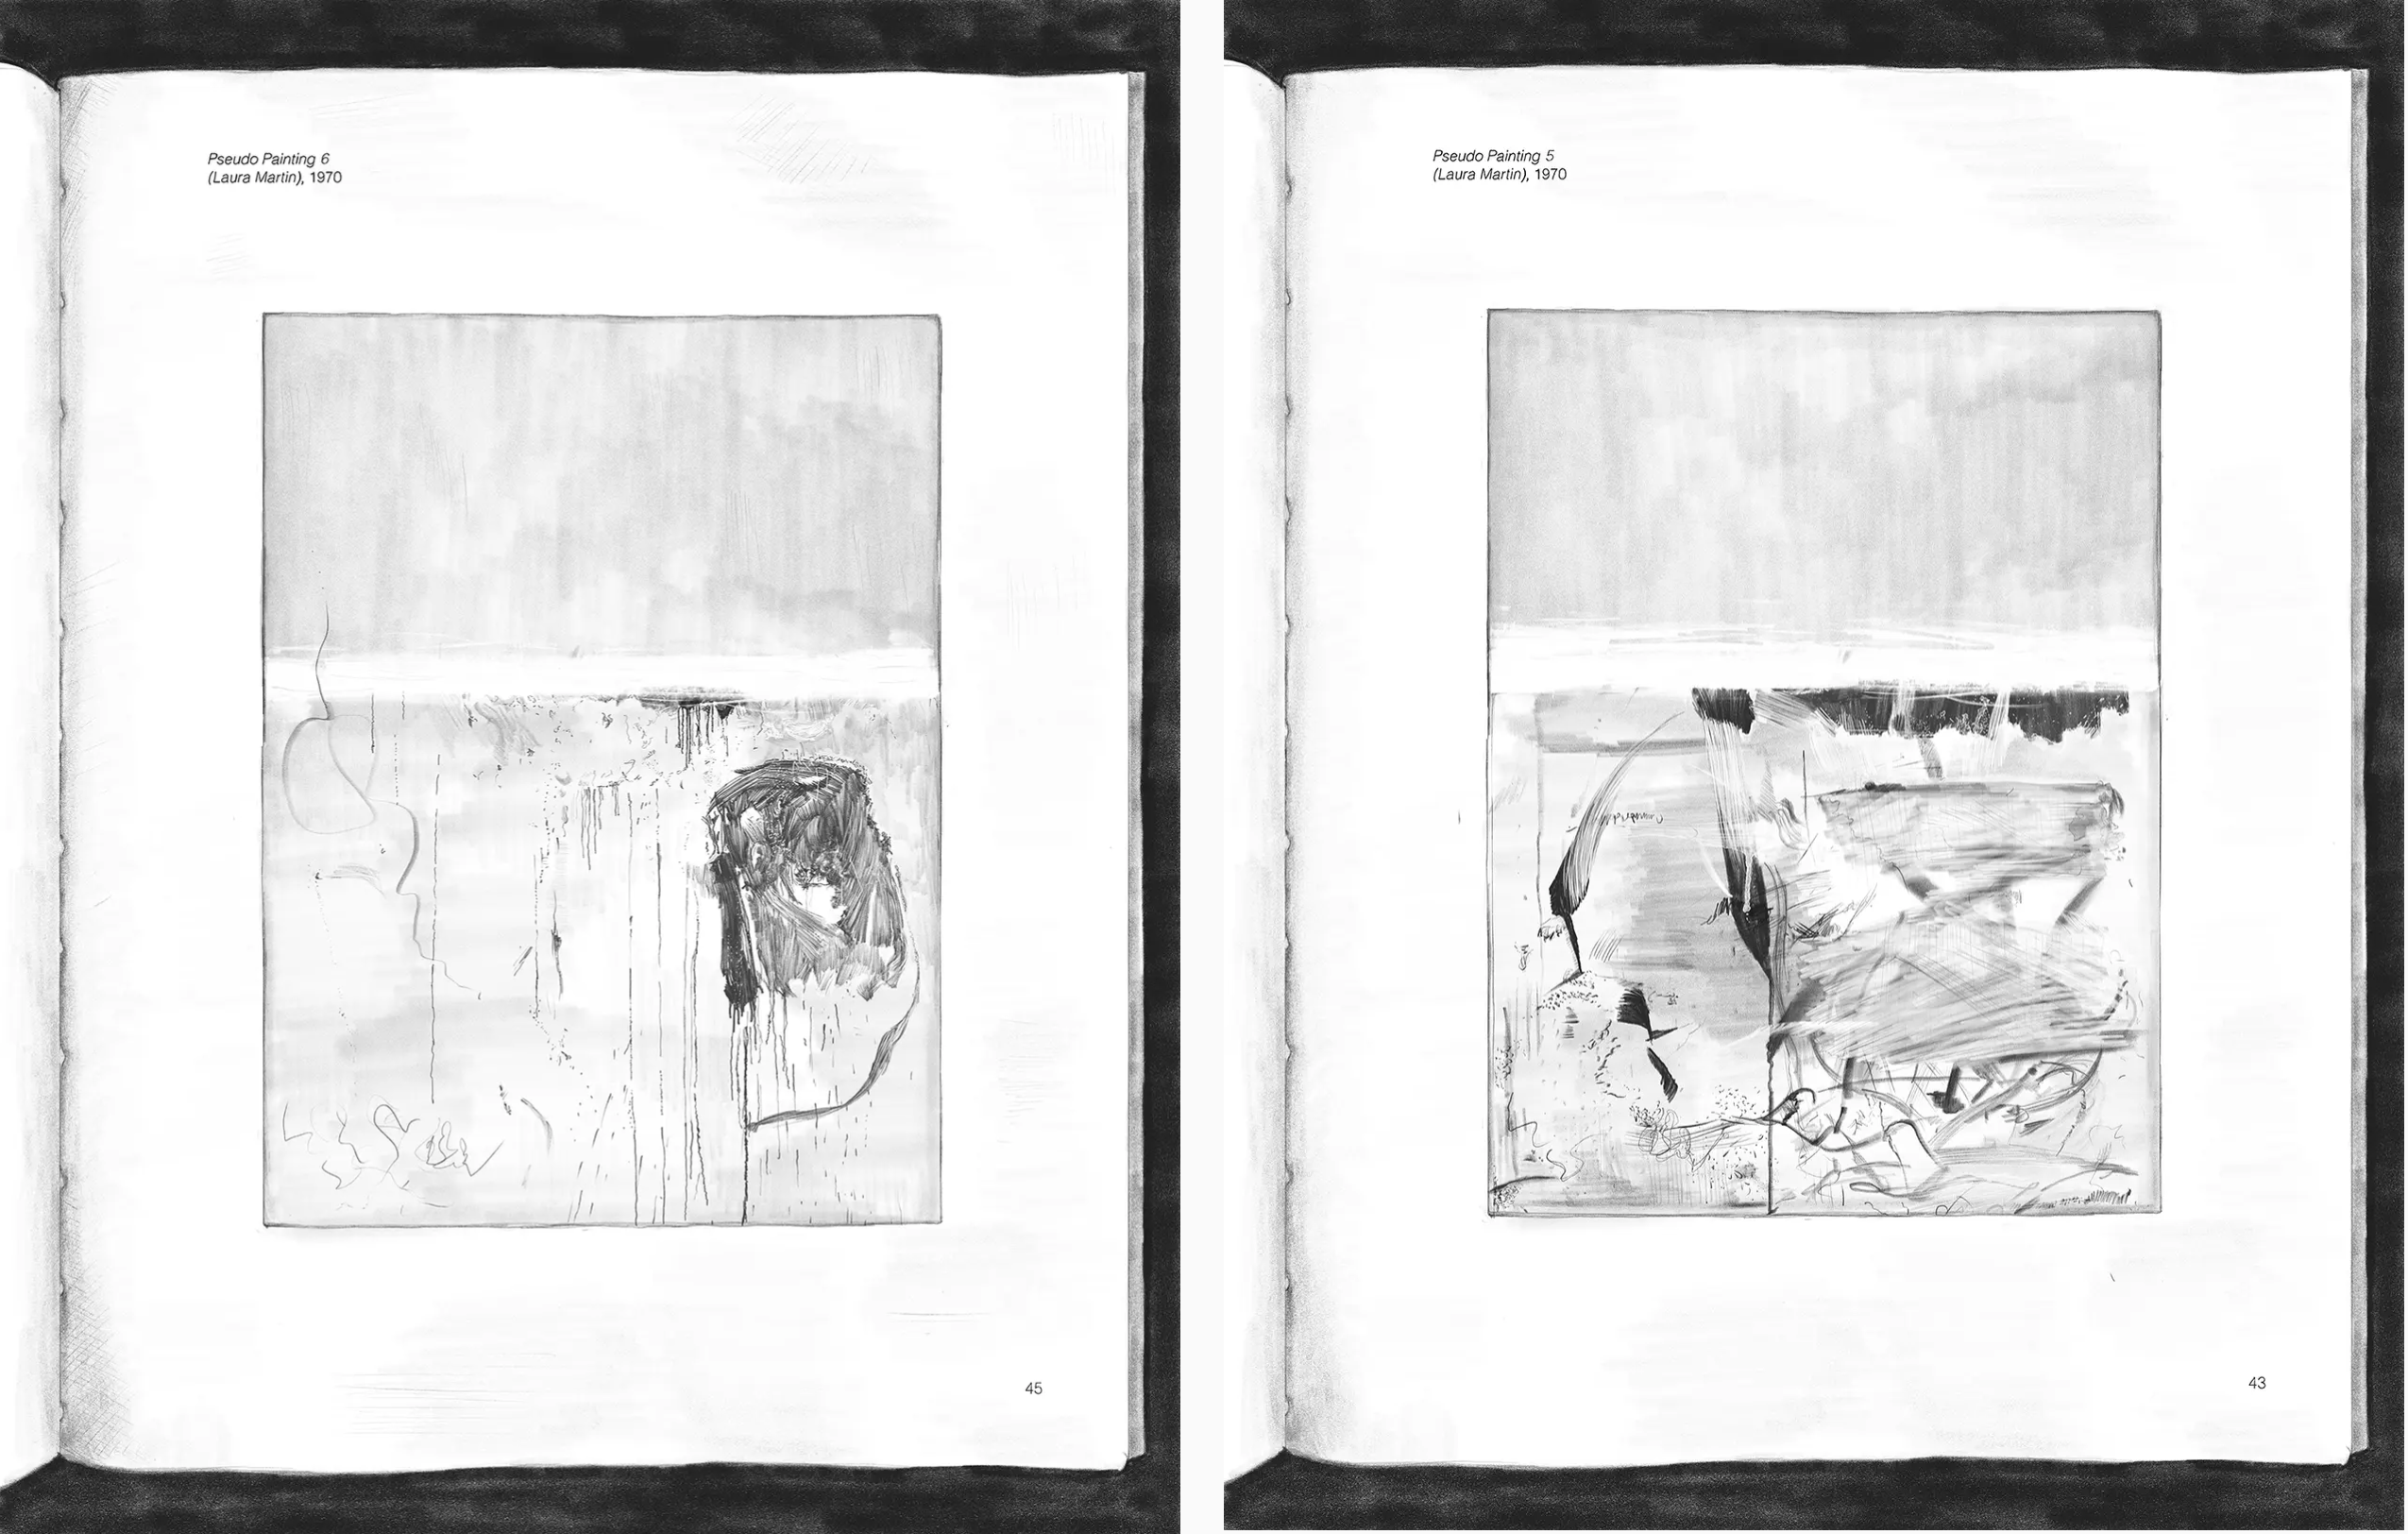 Digit the faktal drawings in fake pencil of fake abstract paintings created by the fake artist Laura Martin (described by David Rosenhan) 